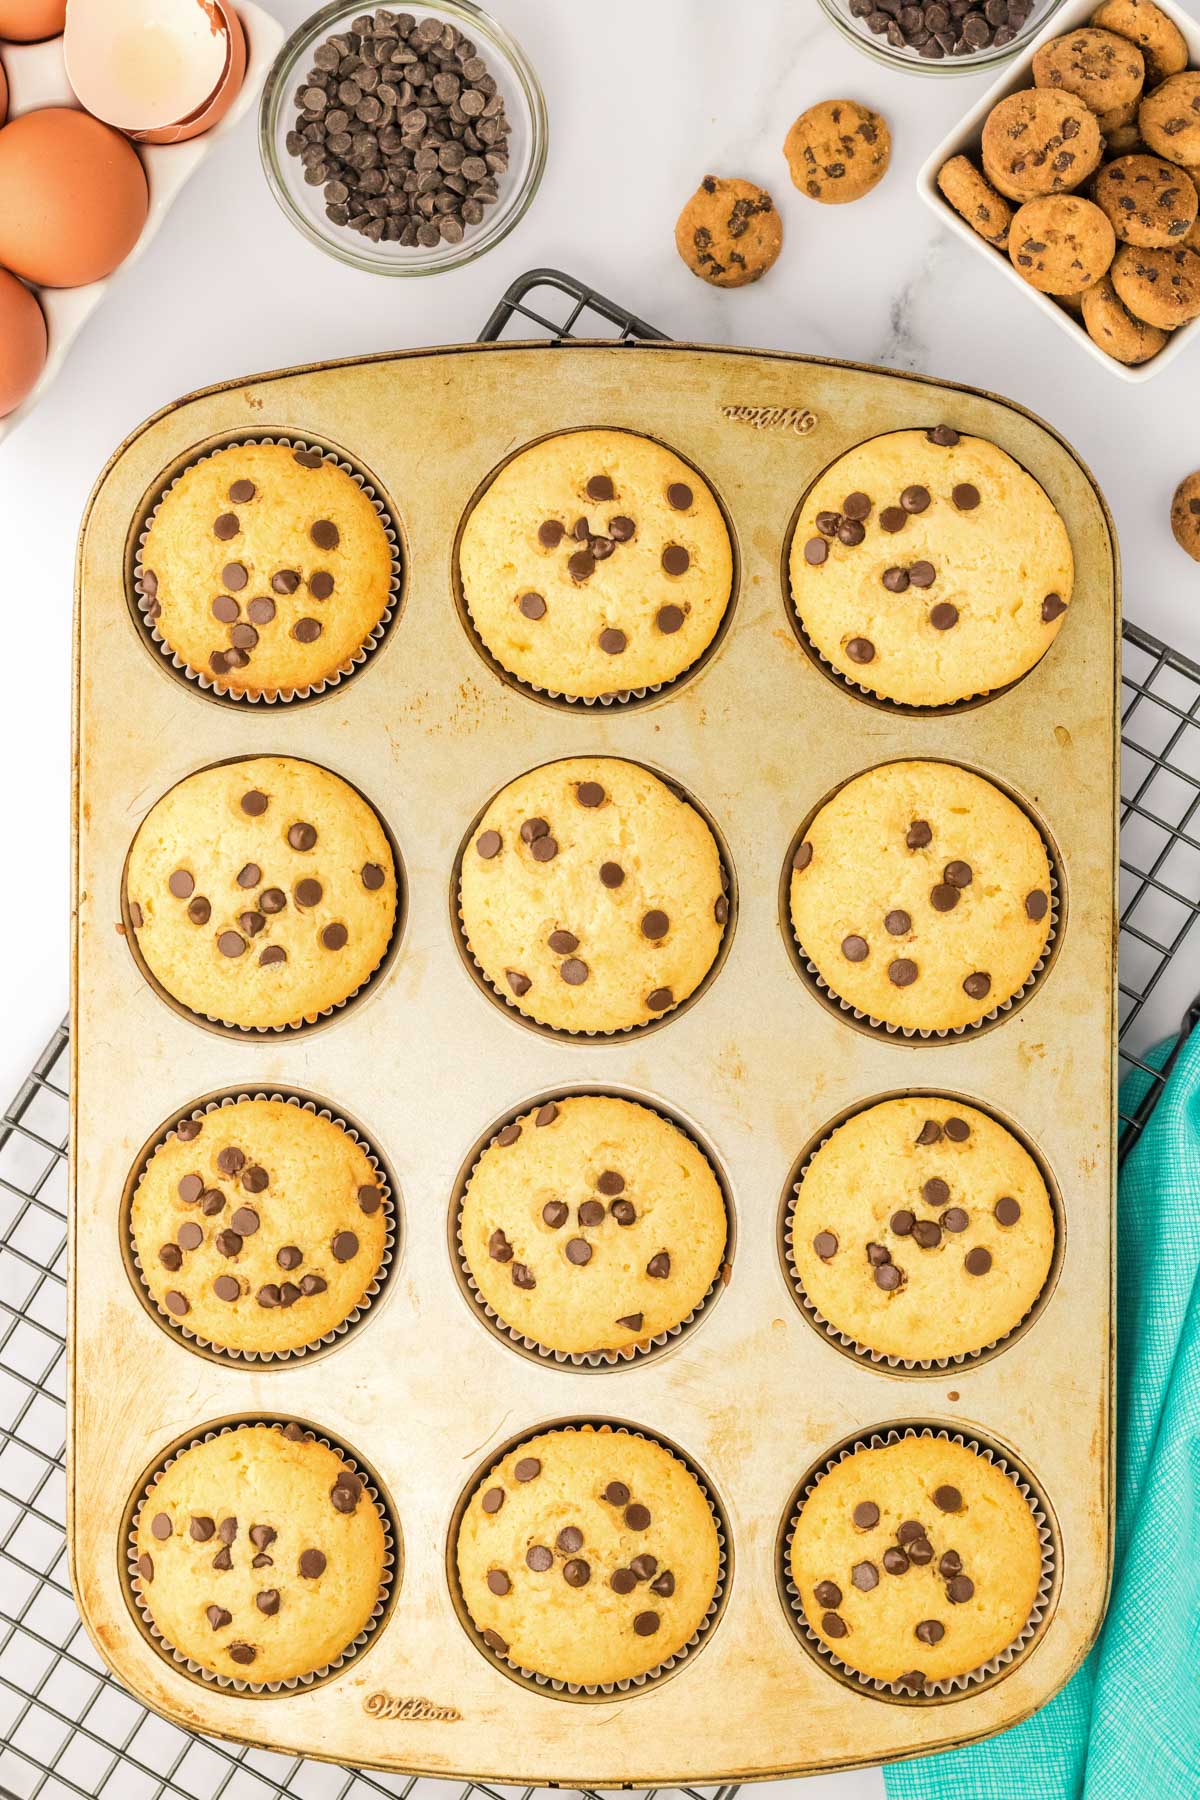 Chocolate chip cupcakes in a cupcake pan.